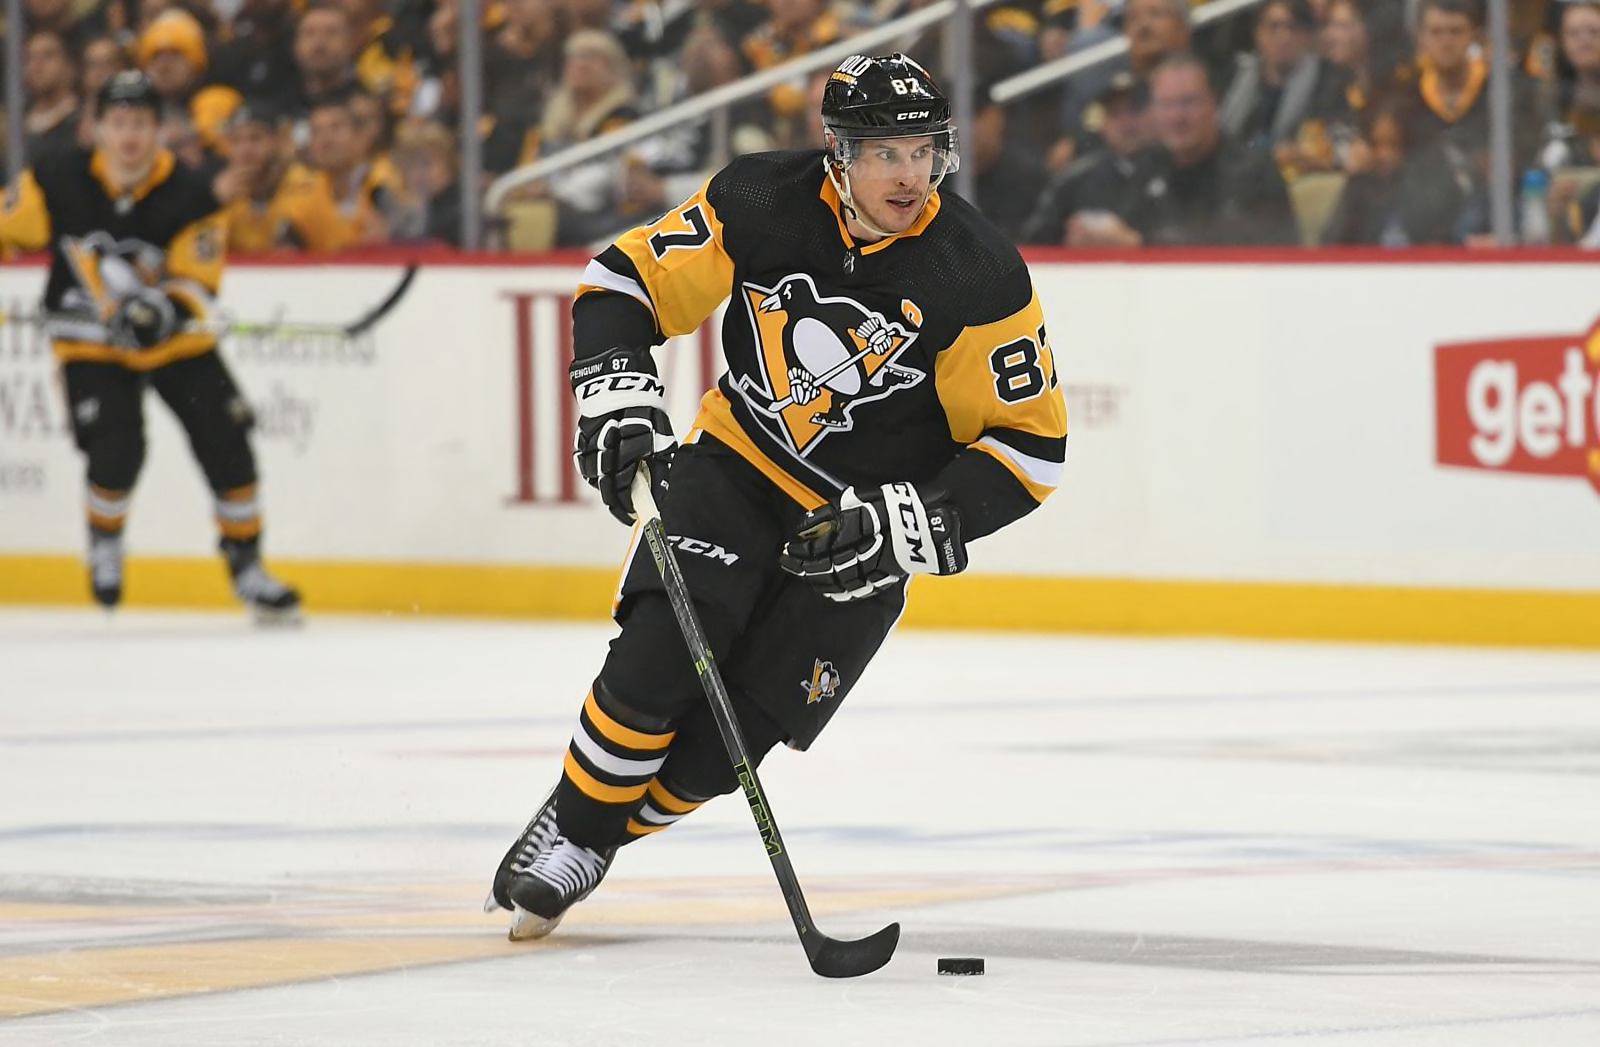 The all 21st century All-Pittsburgh Penguins team - PensBurgh